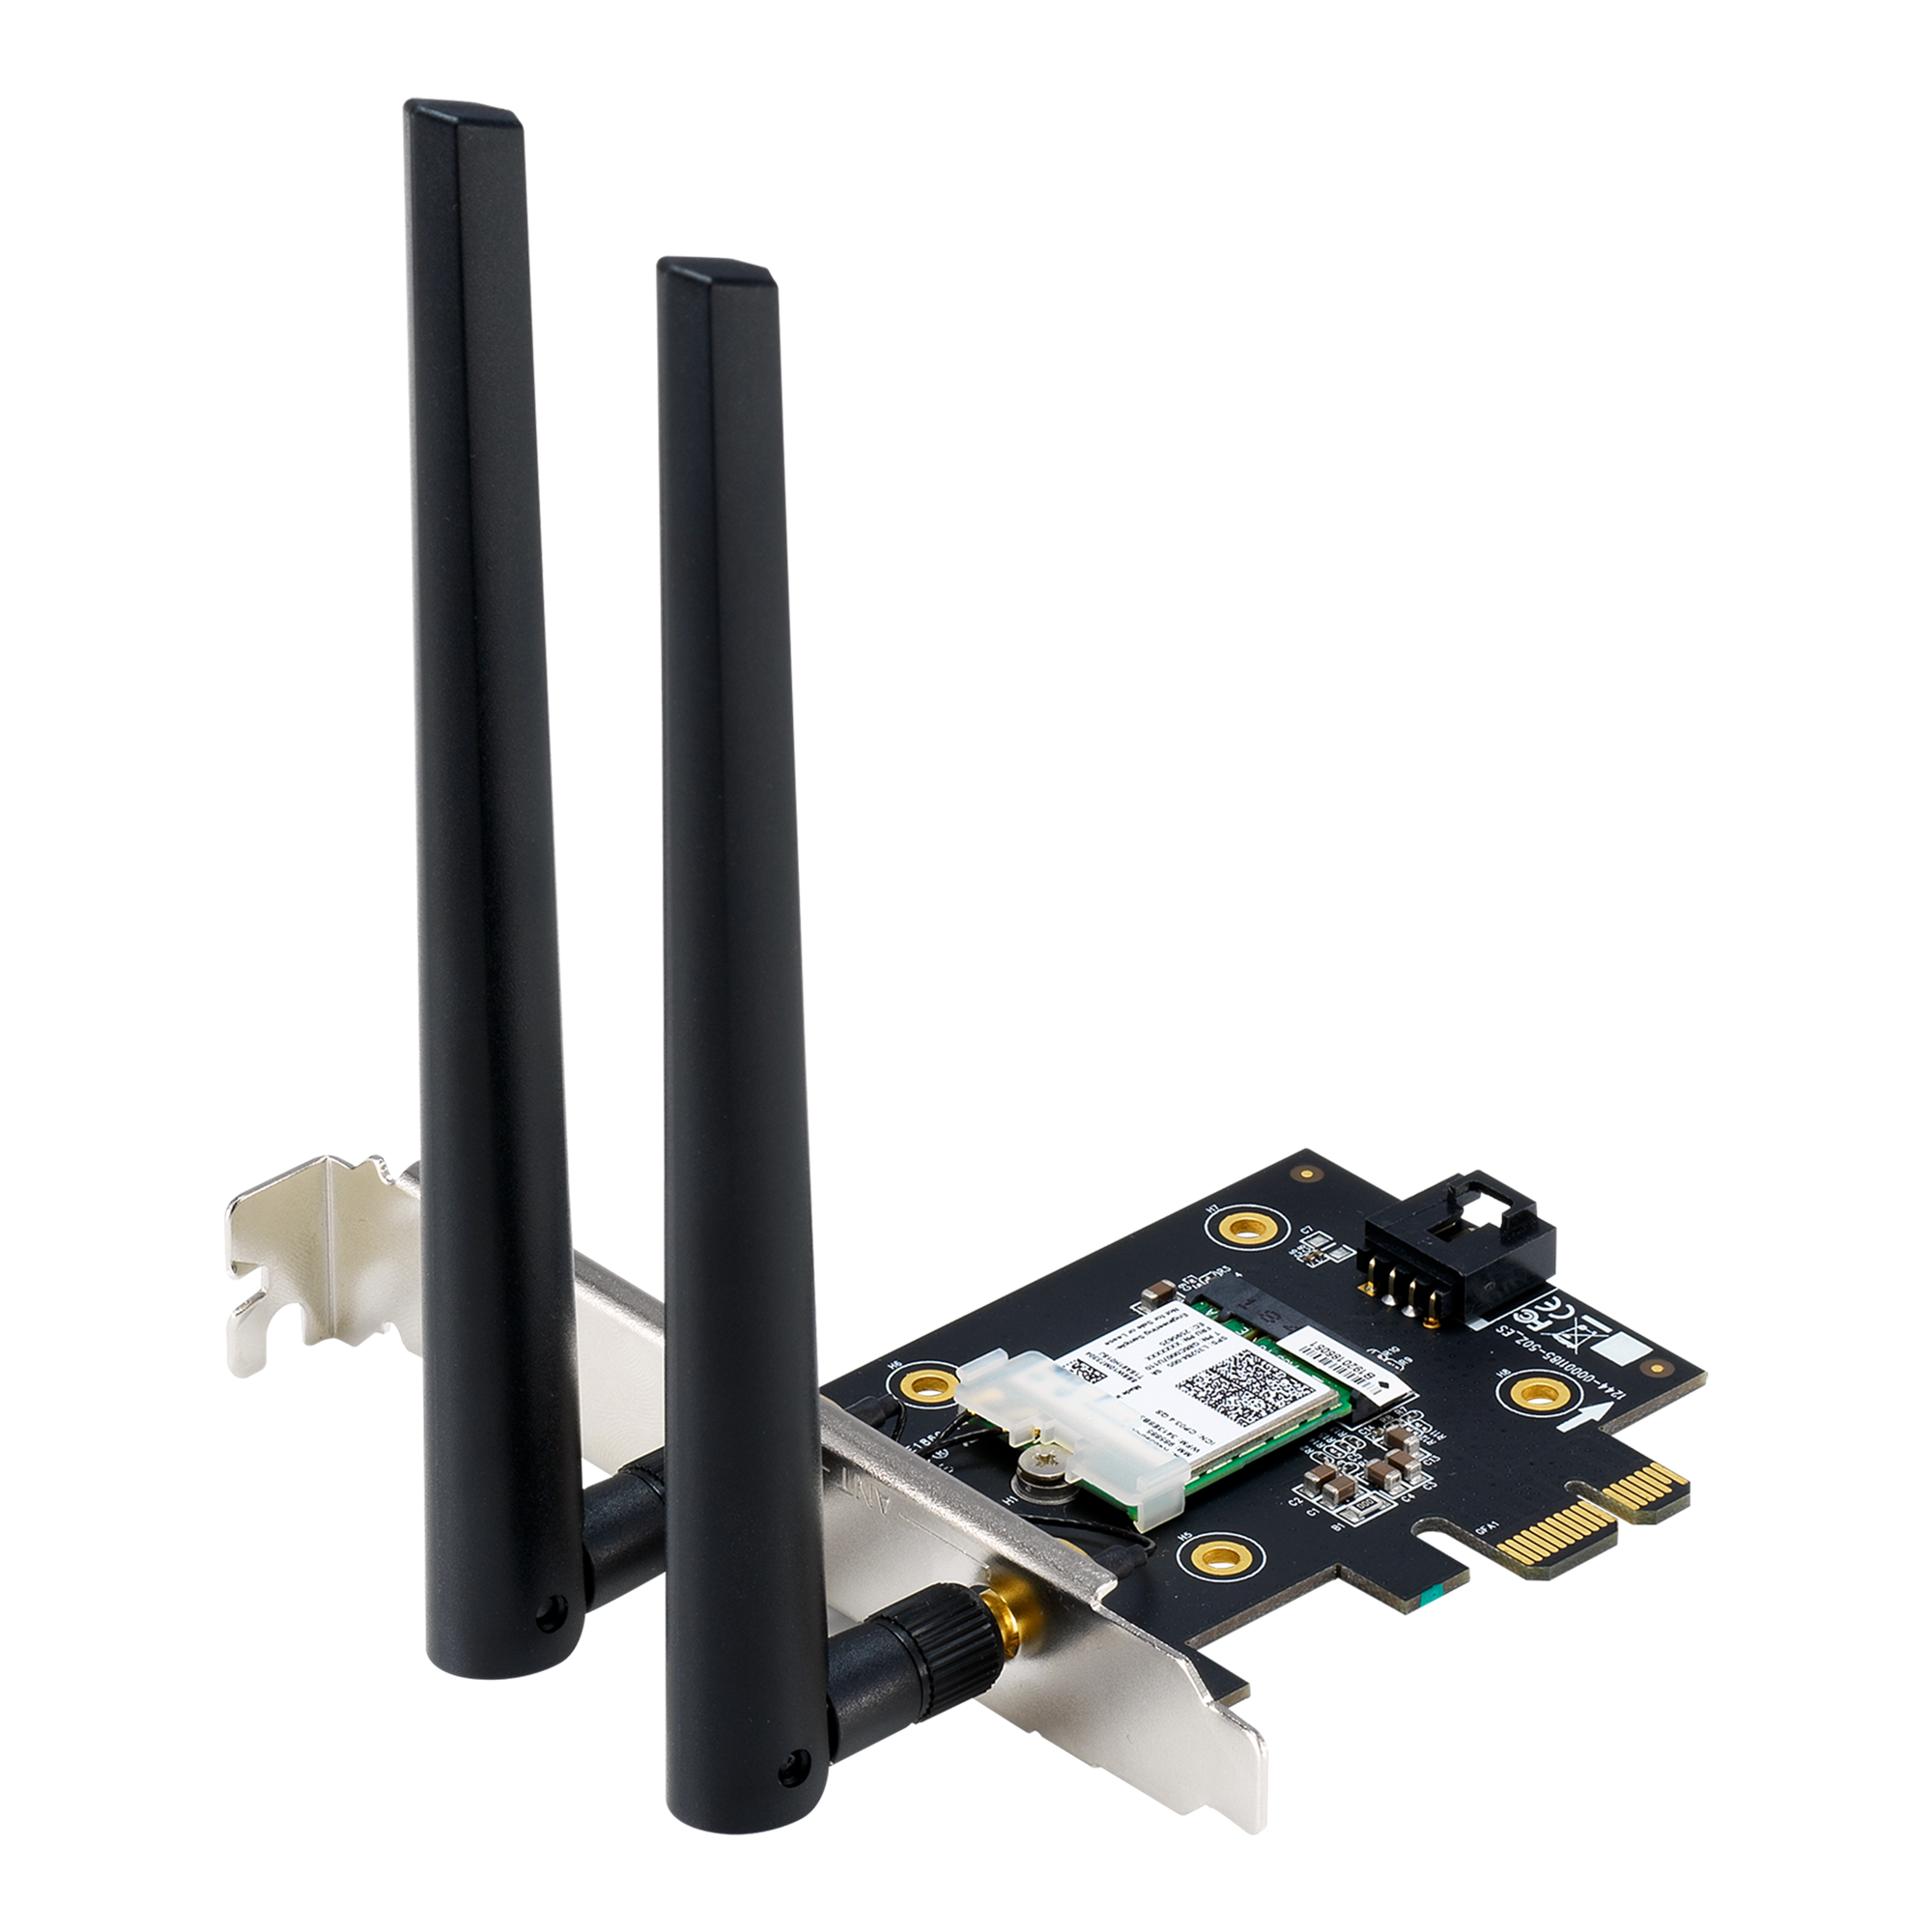 PCE-AX3000｜Wireless & Wired Adapters｜ASUS USA